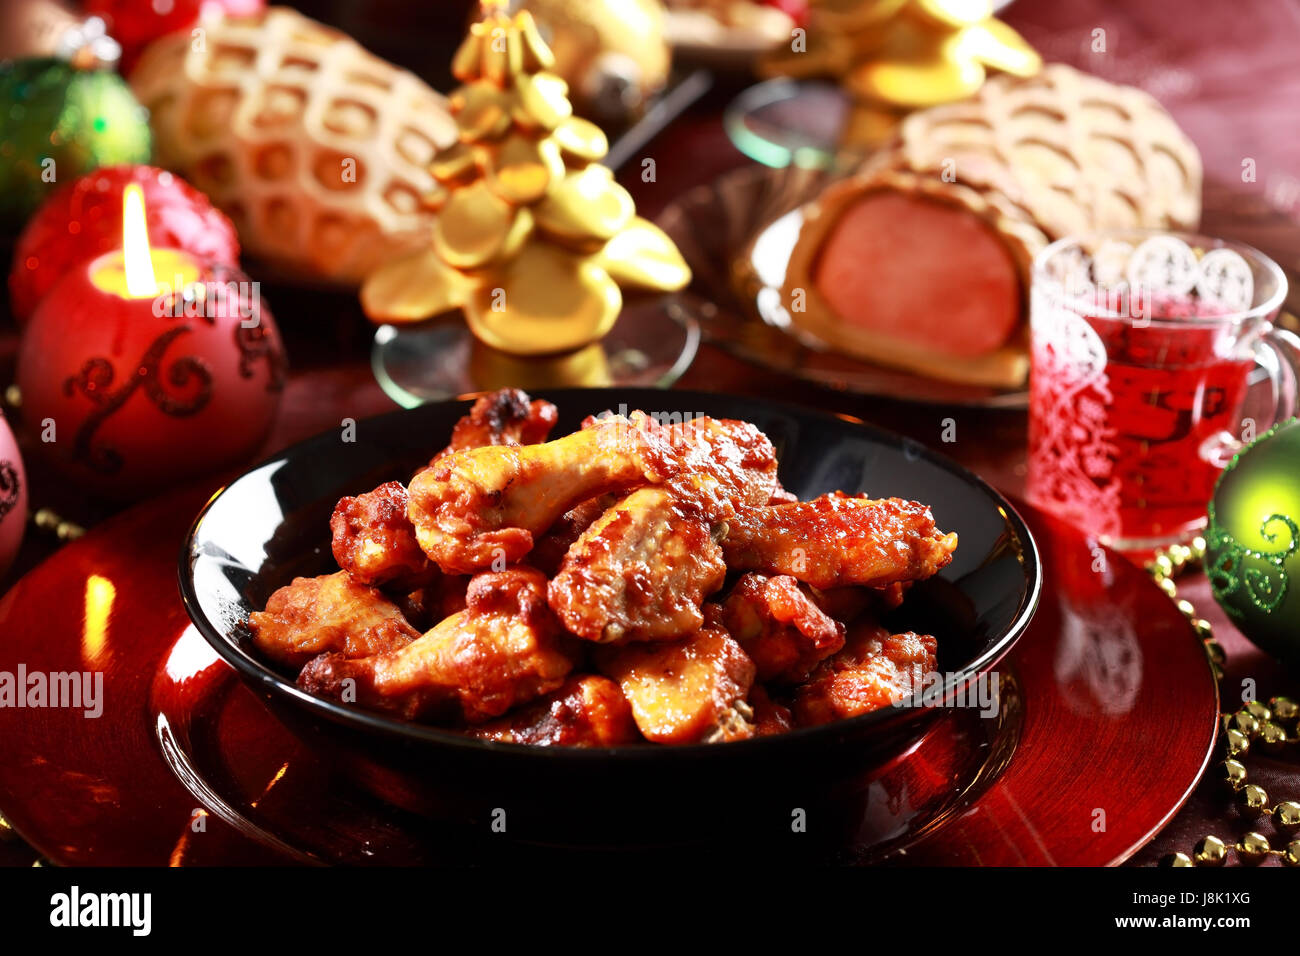 food, aliment, hot, poultry, chicken, christmas, baking, wings, meat, xmas, Stock Photo